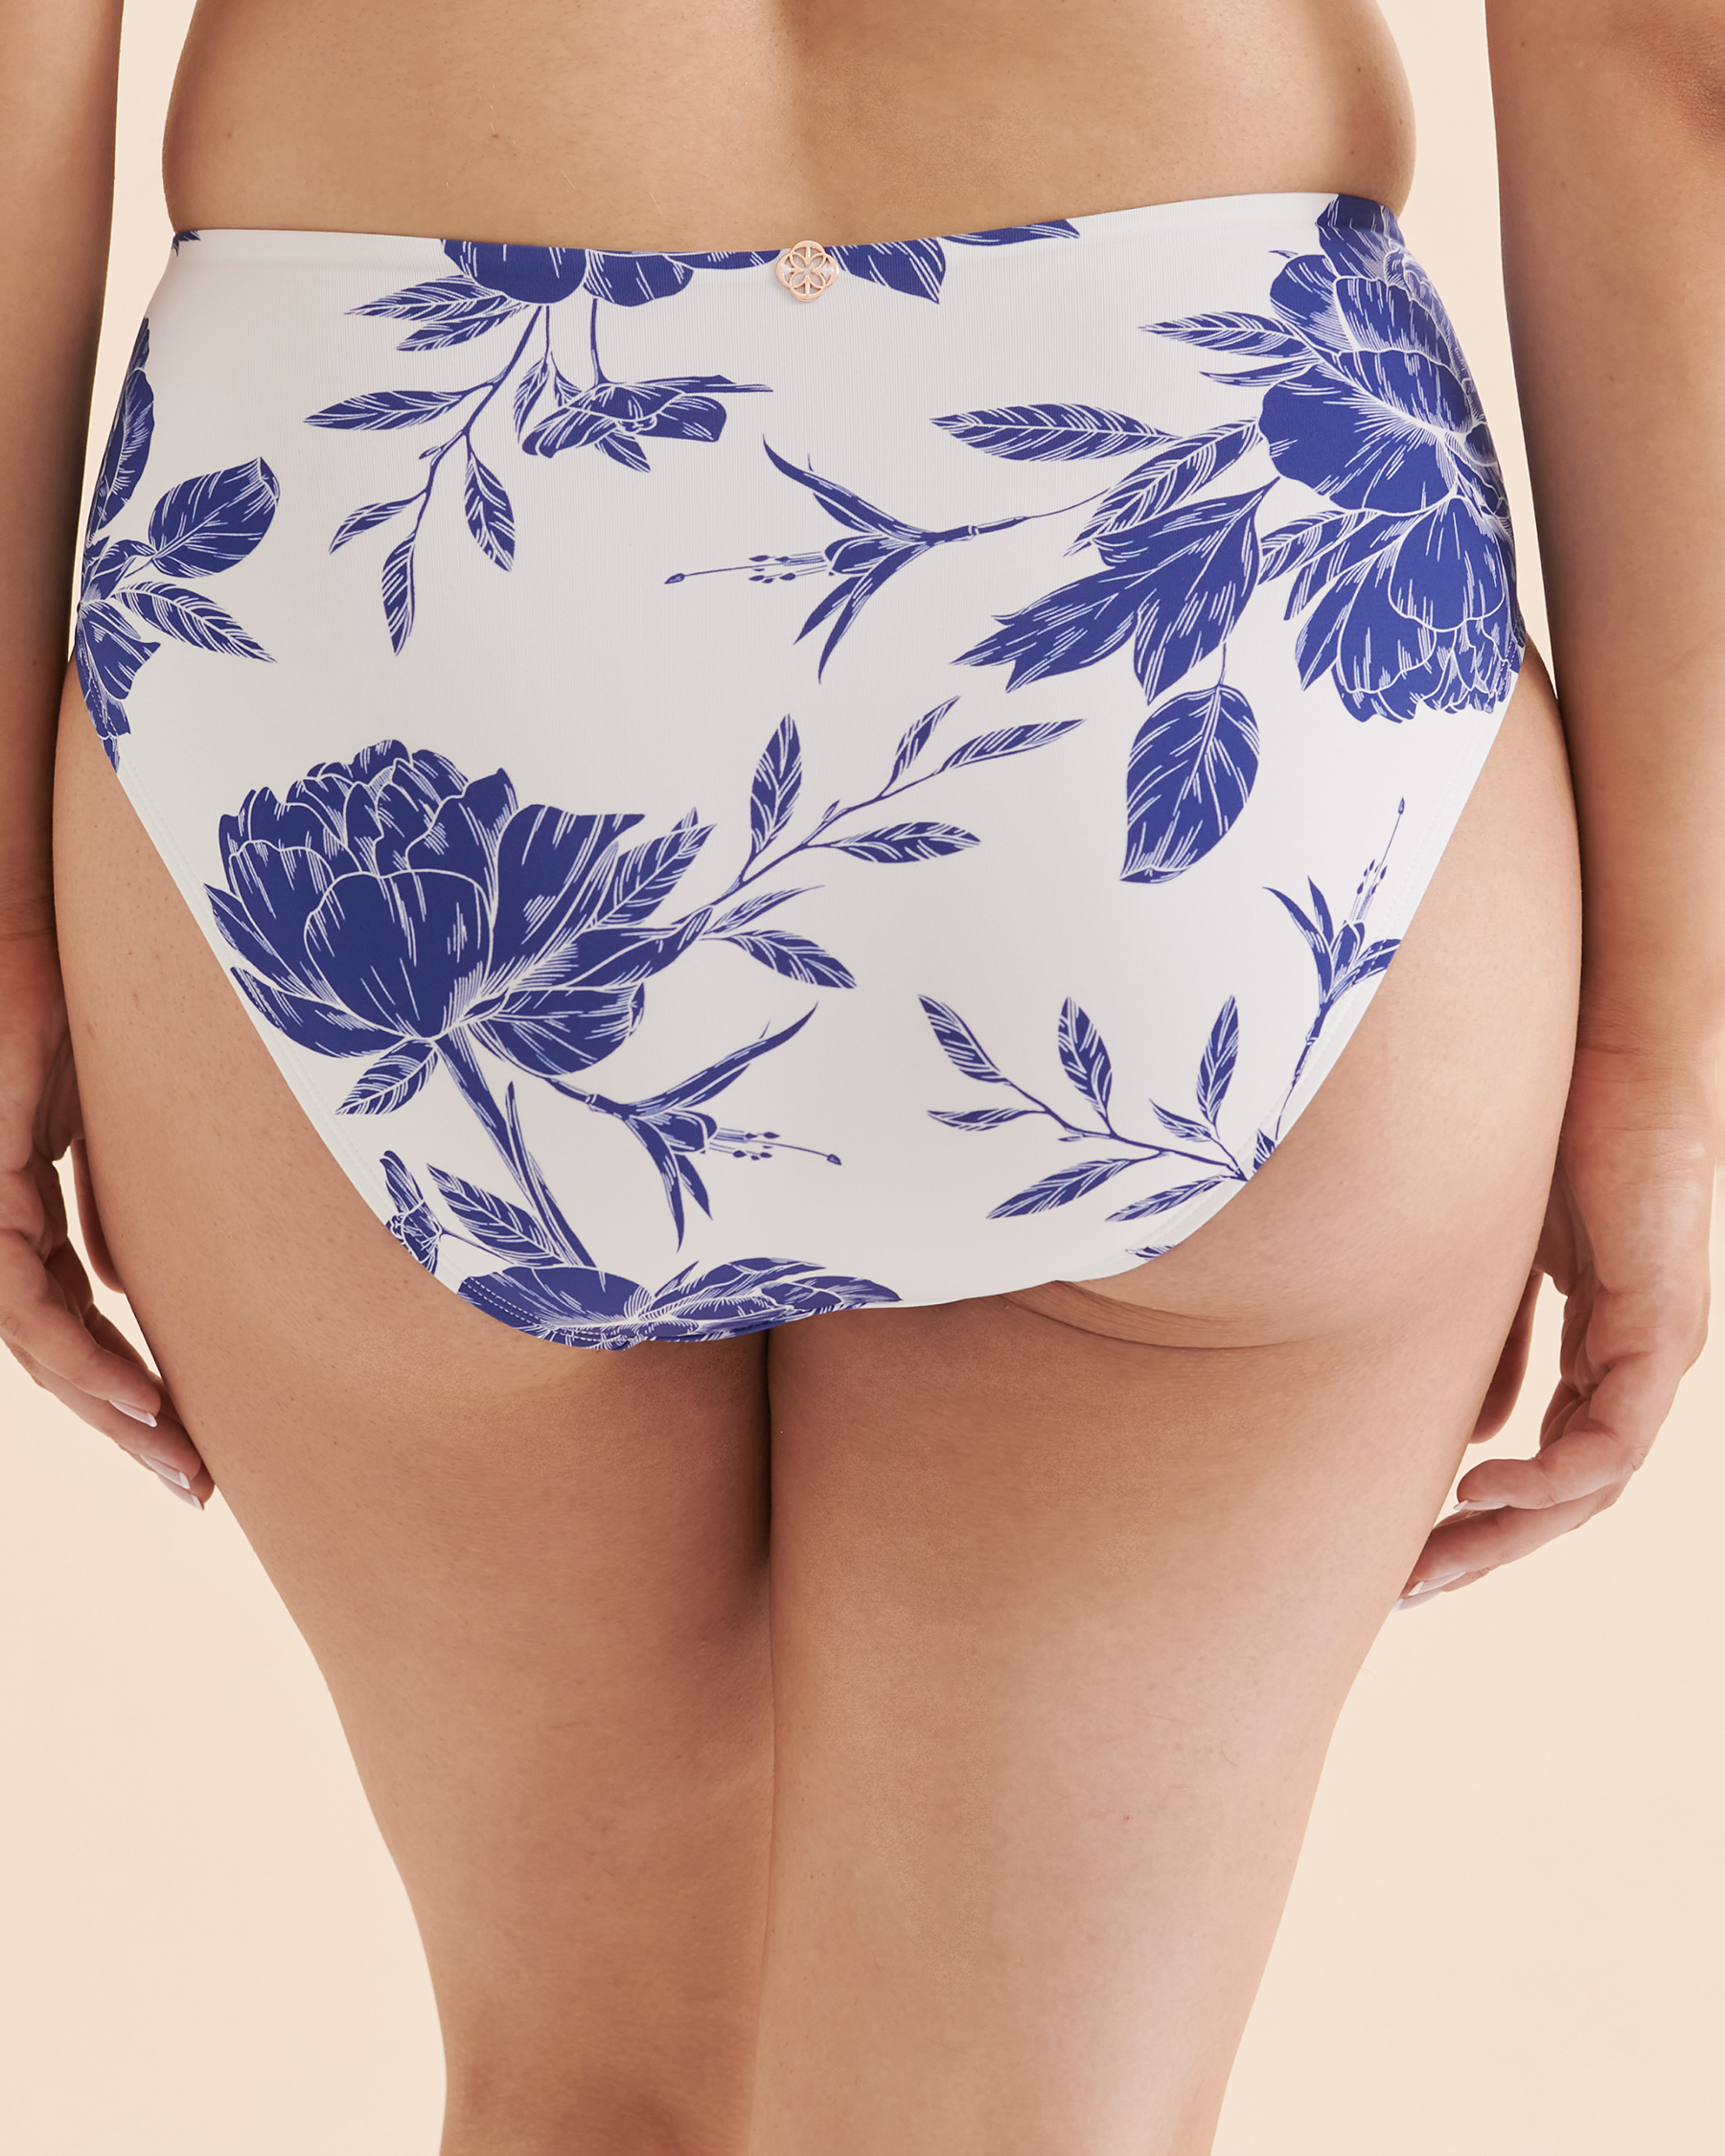 TURQUOISE COUTURE Floral High Waist Bikini Bottom White & Blue Floral 01300272 - View2